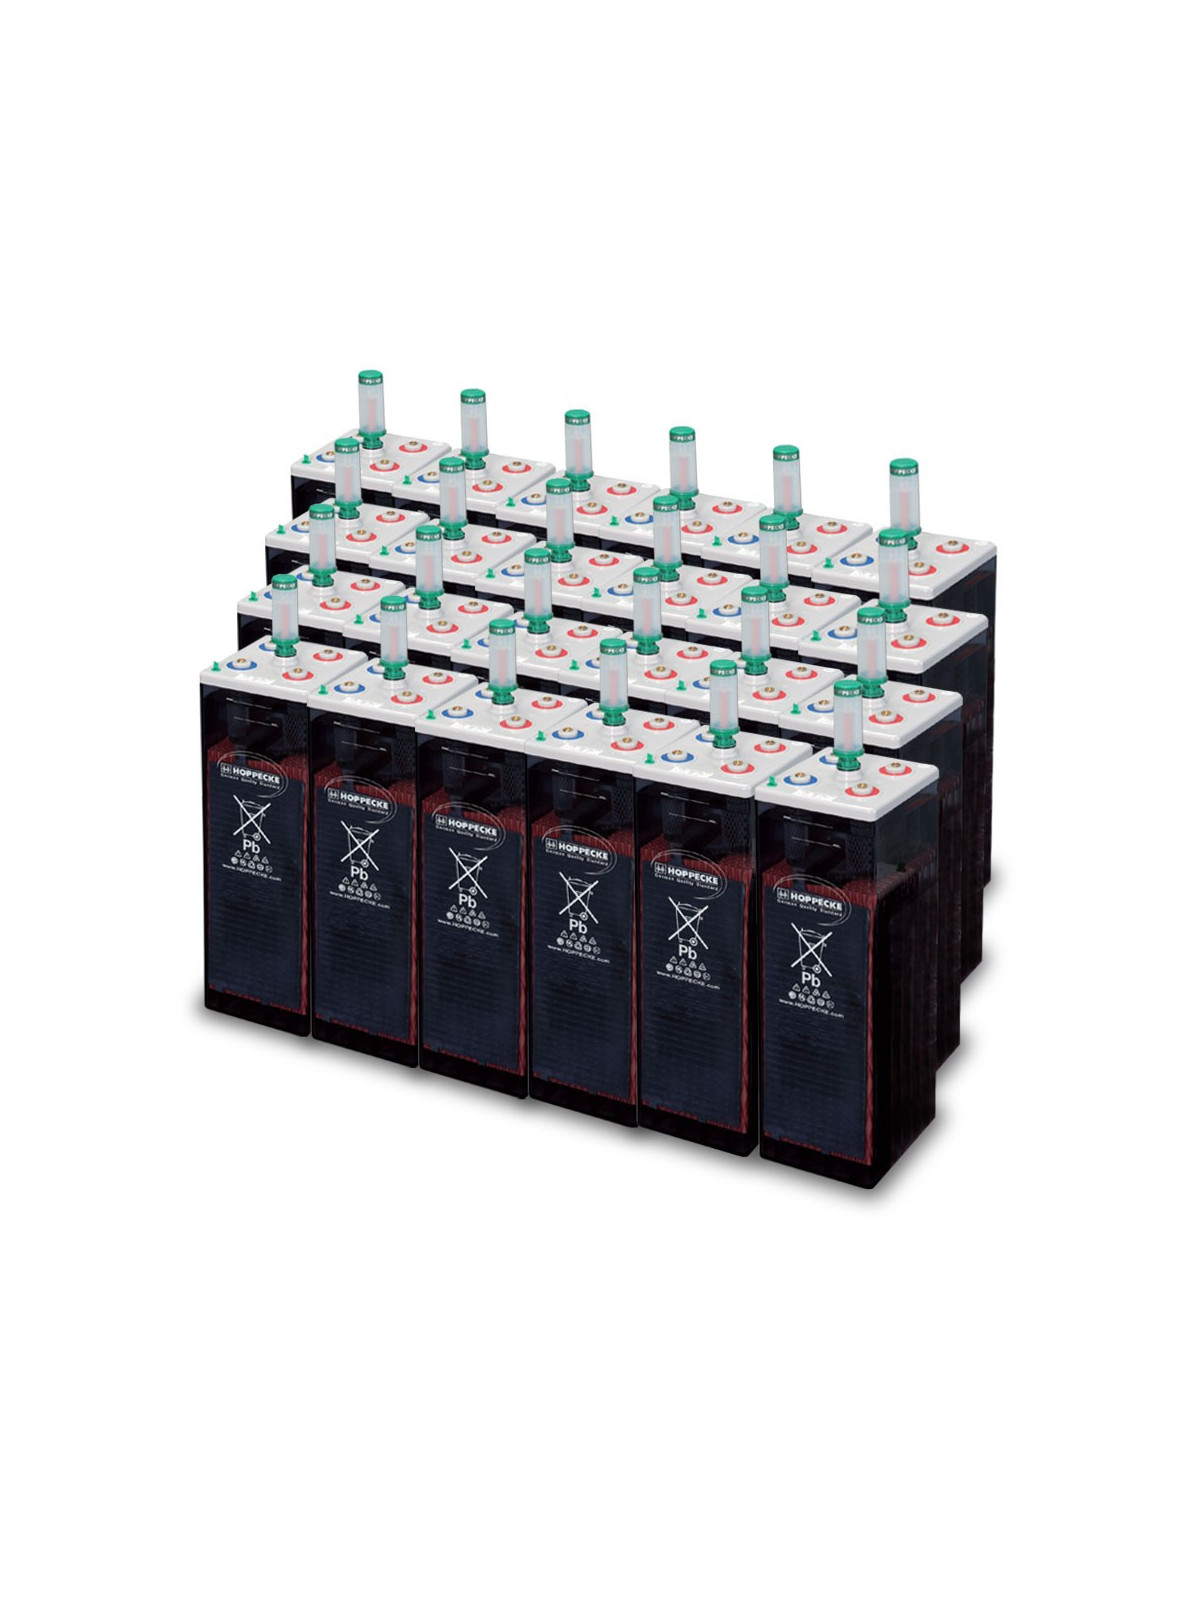 65 kWh OPzS 48V battery pack